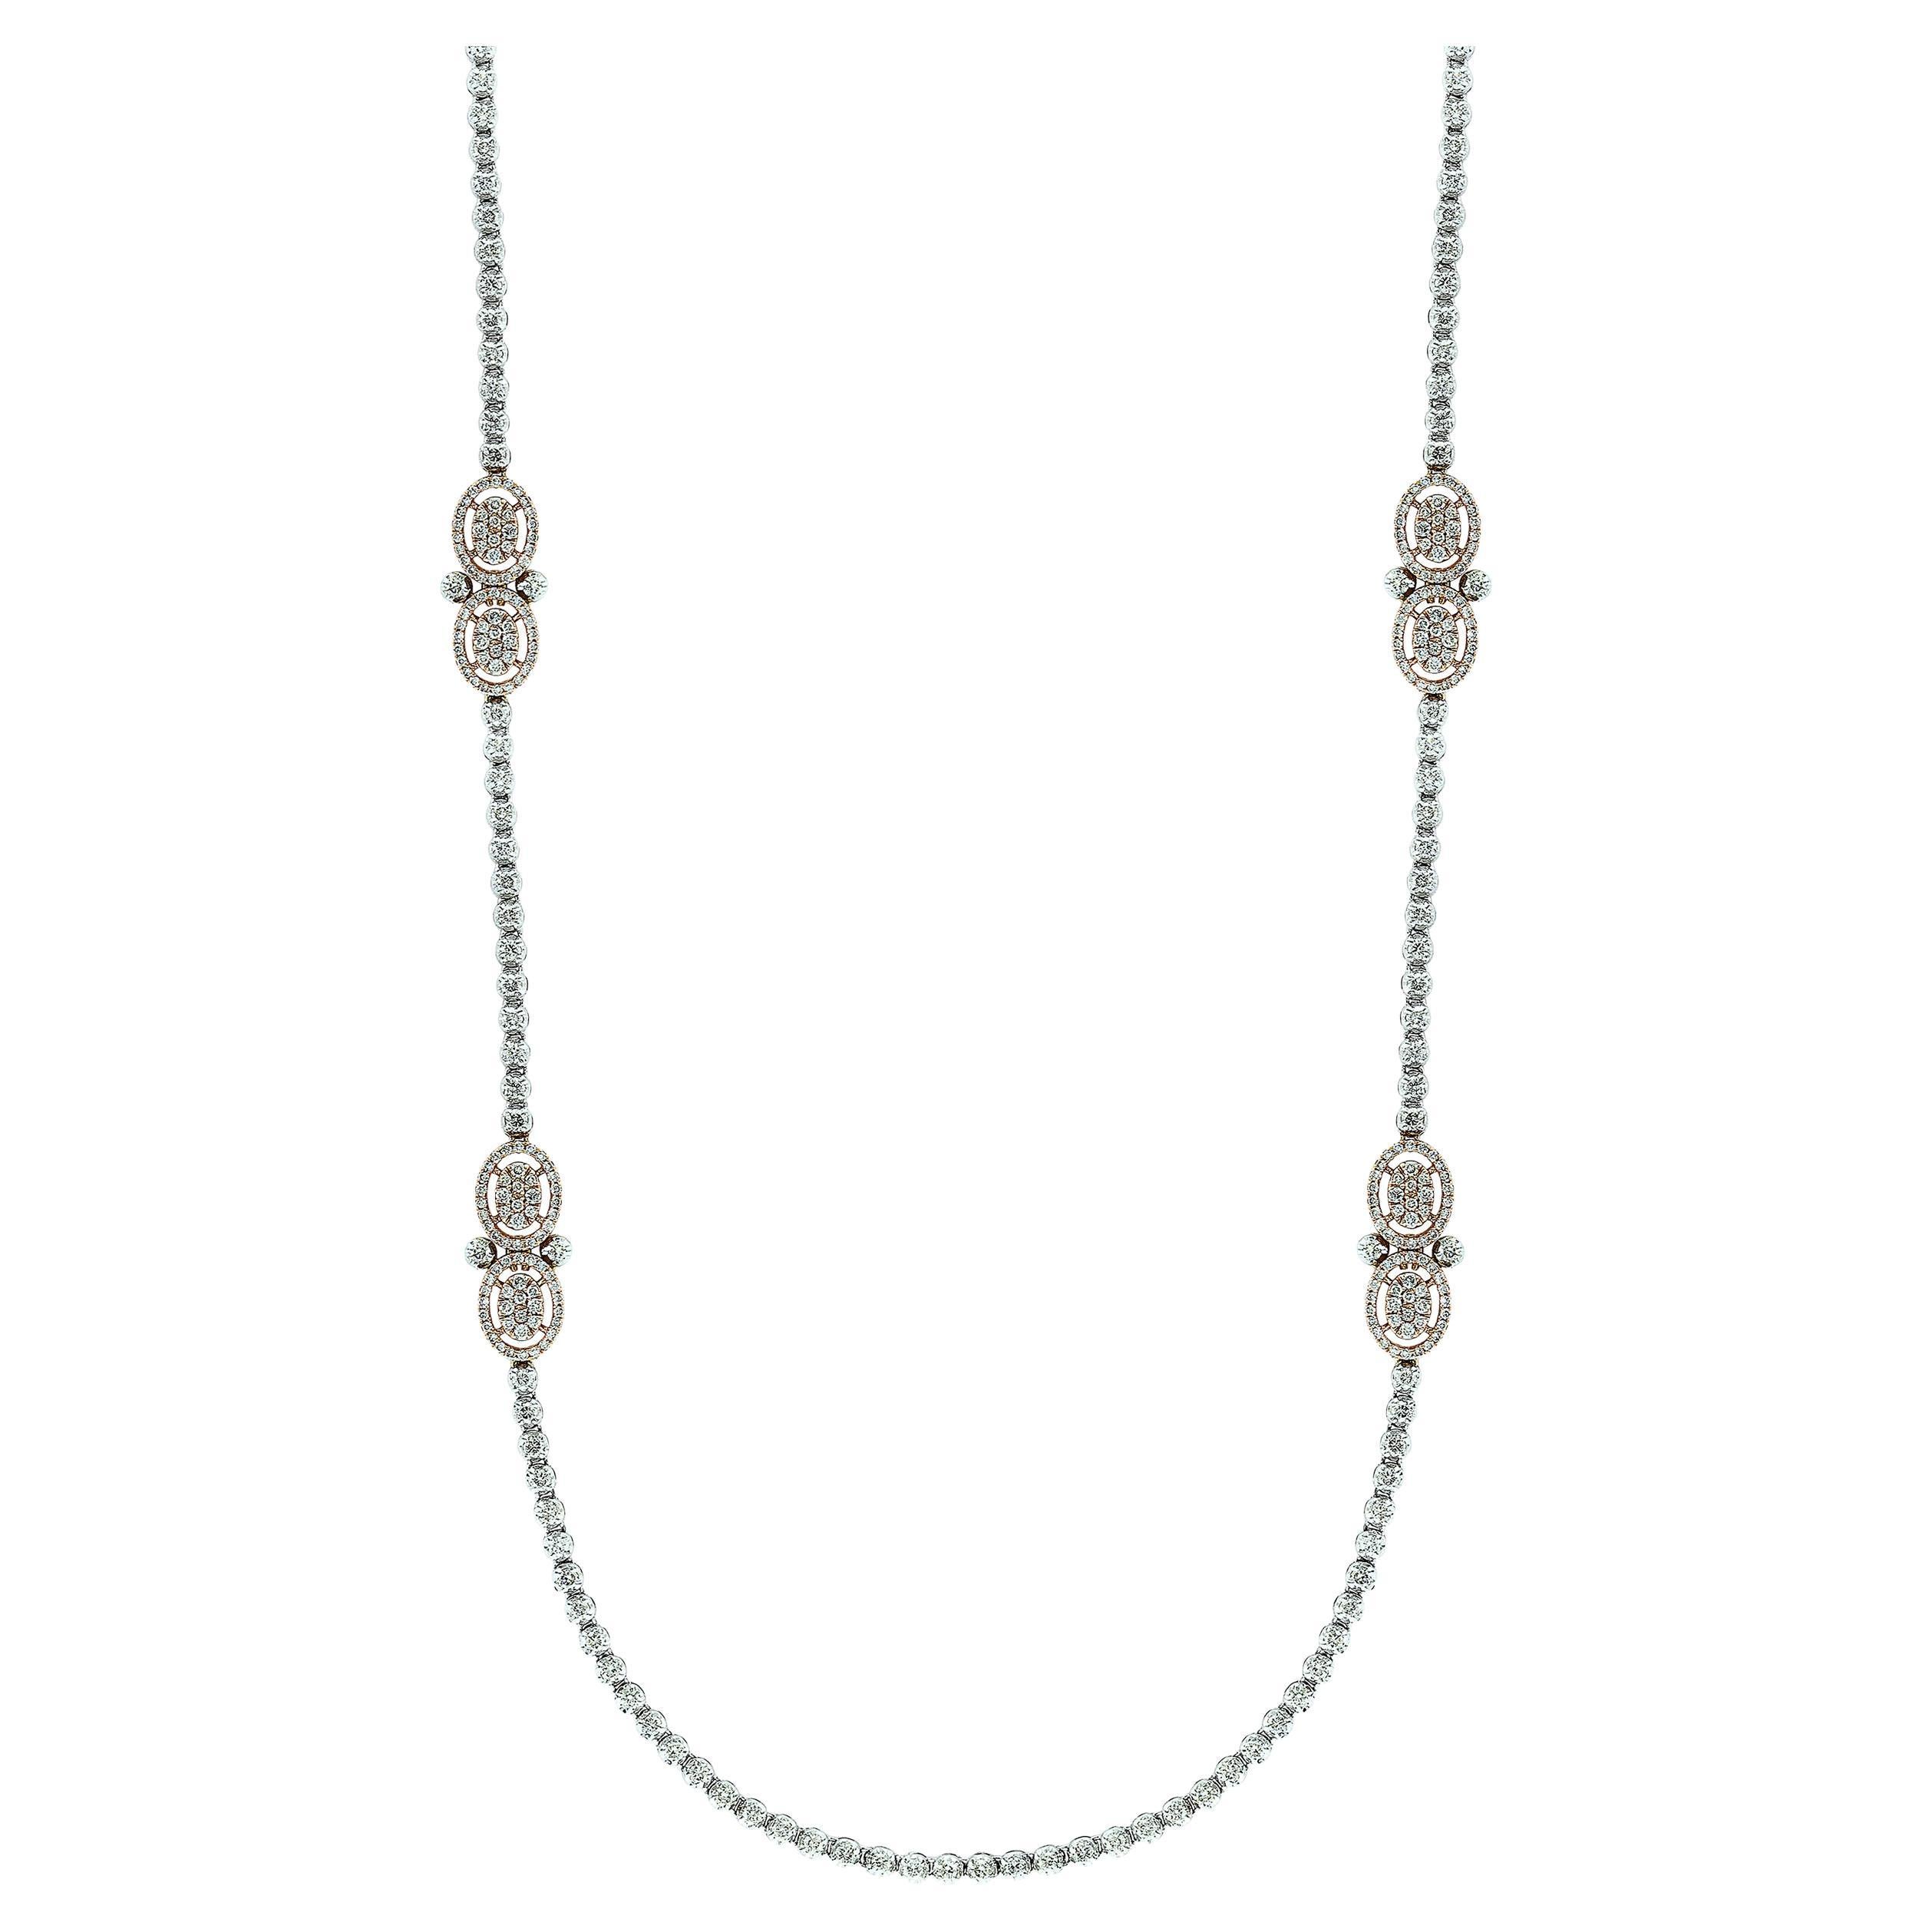 8 Ct Brilliant Cut Diamond Long Necklace in White & Pink 14 K Gold 27 Gm